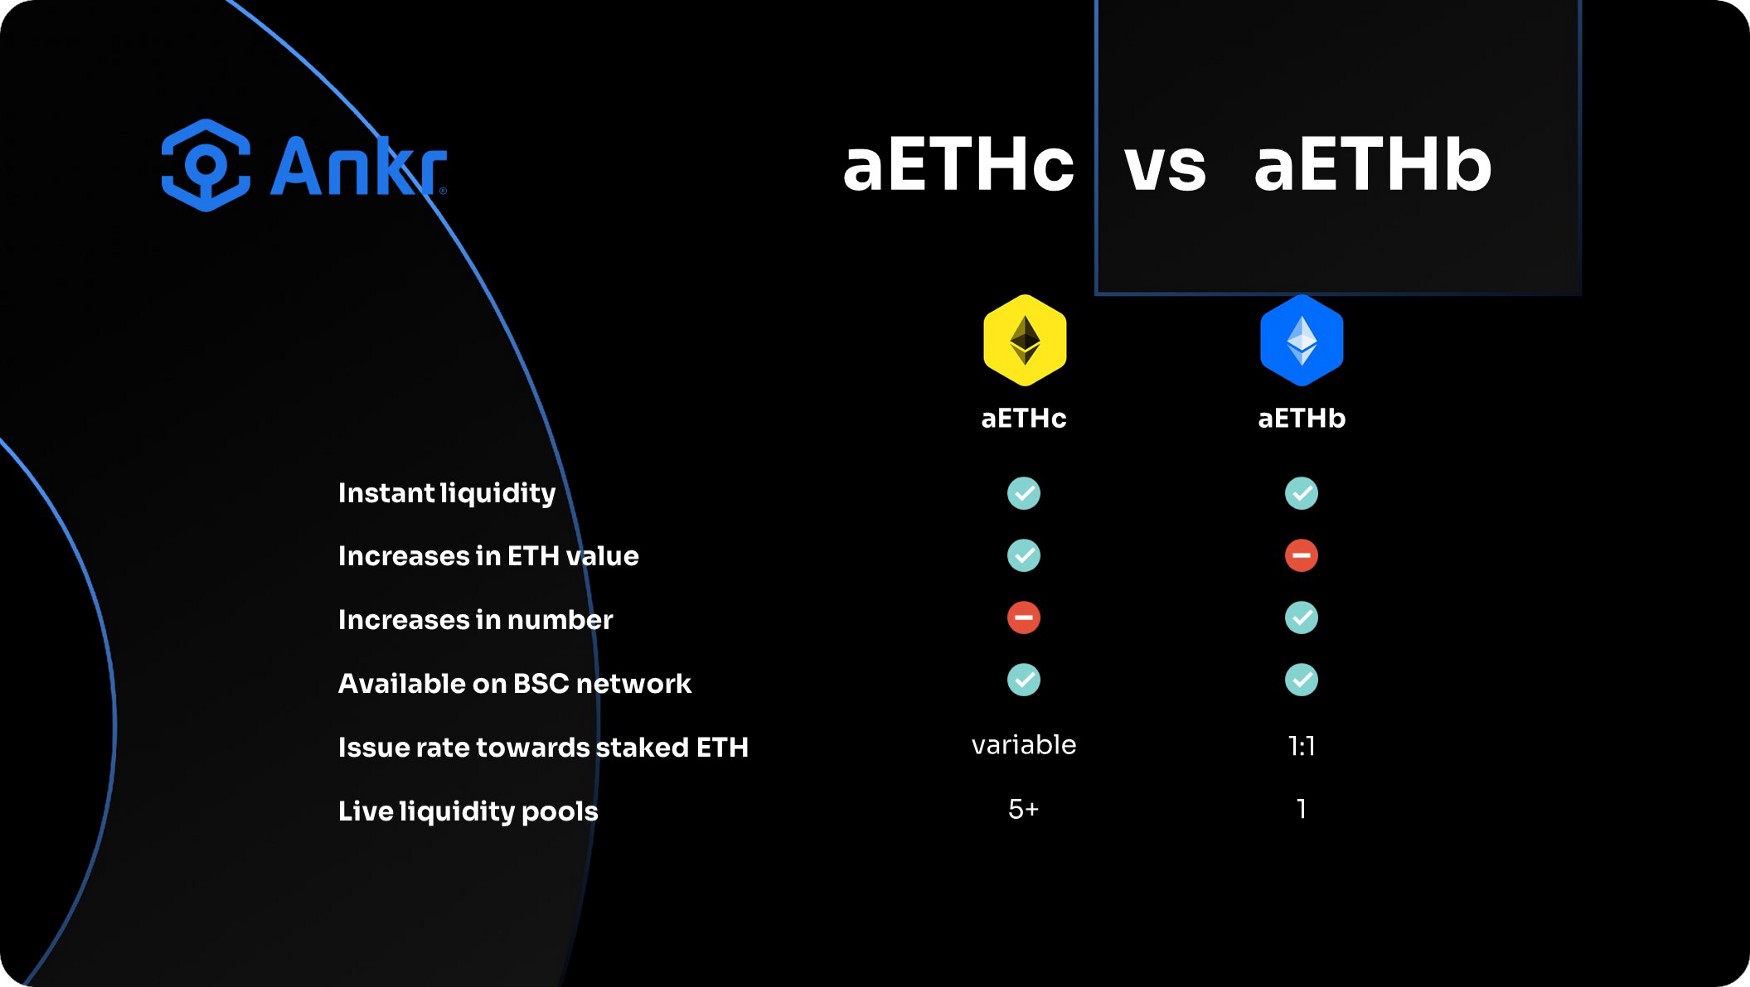 Difference between aETHb and aETHc